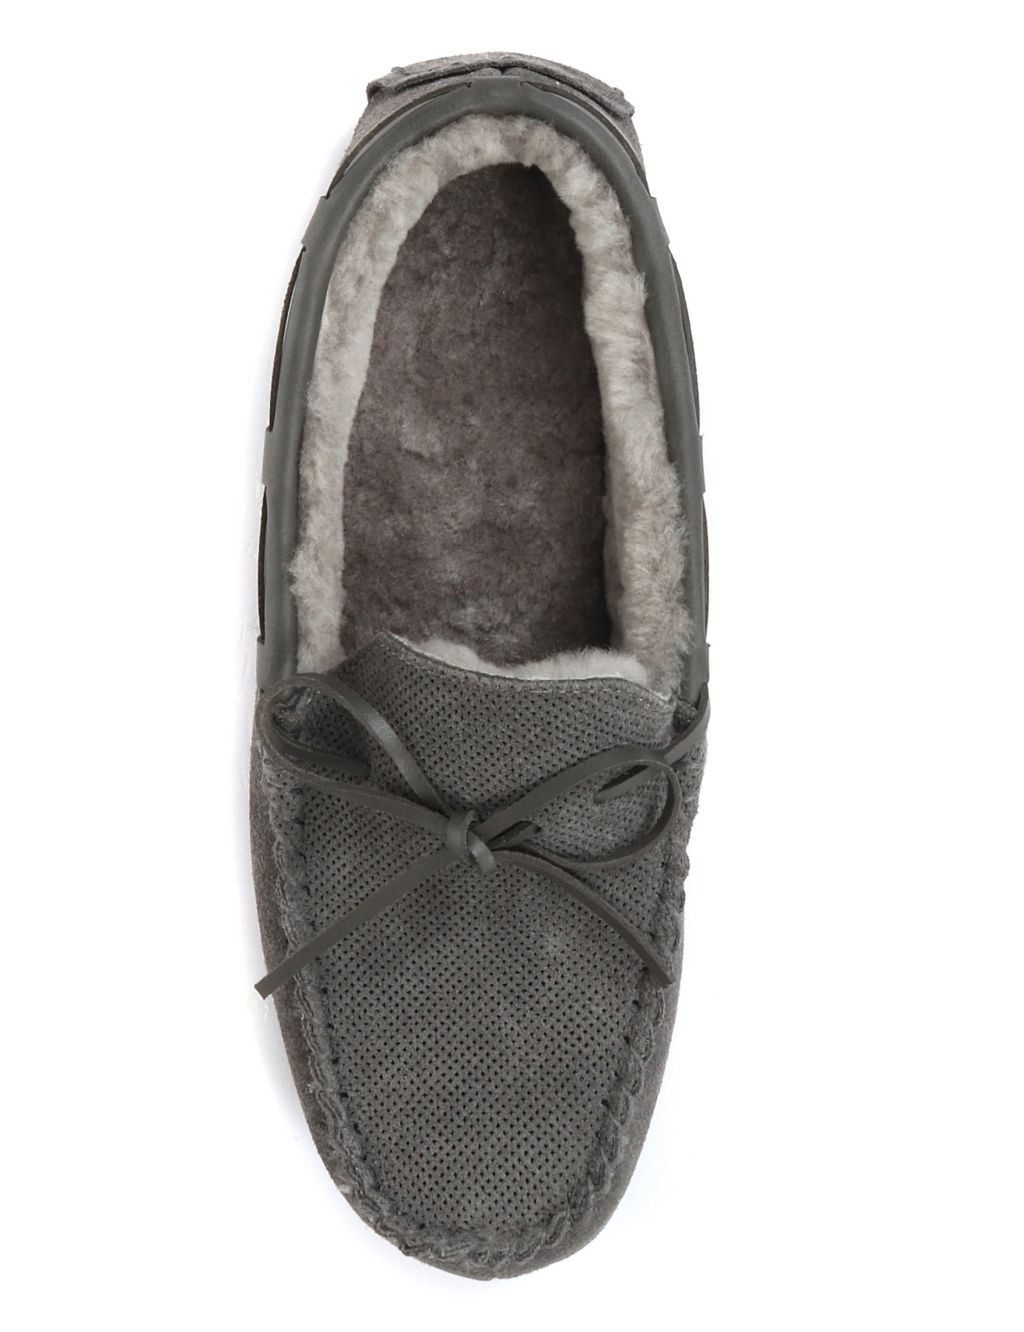 Suede Moccasin Slippers image 3